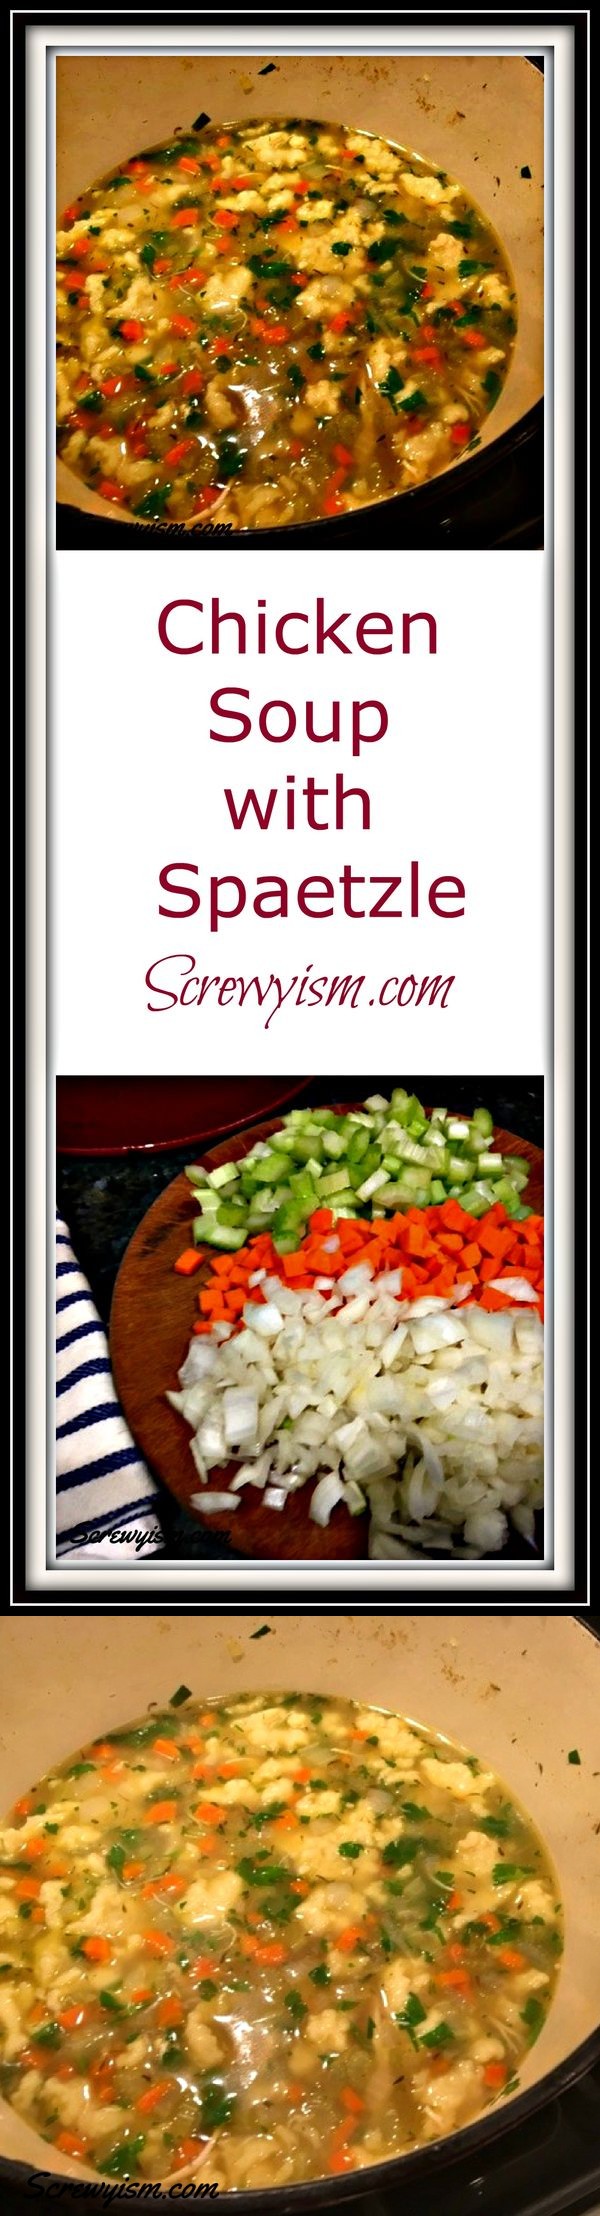 Chicken Soup with Spaetzle